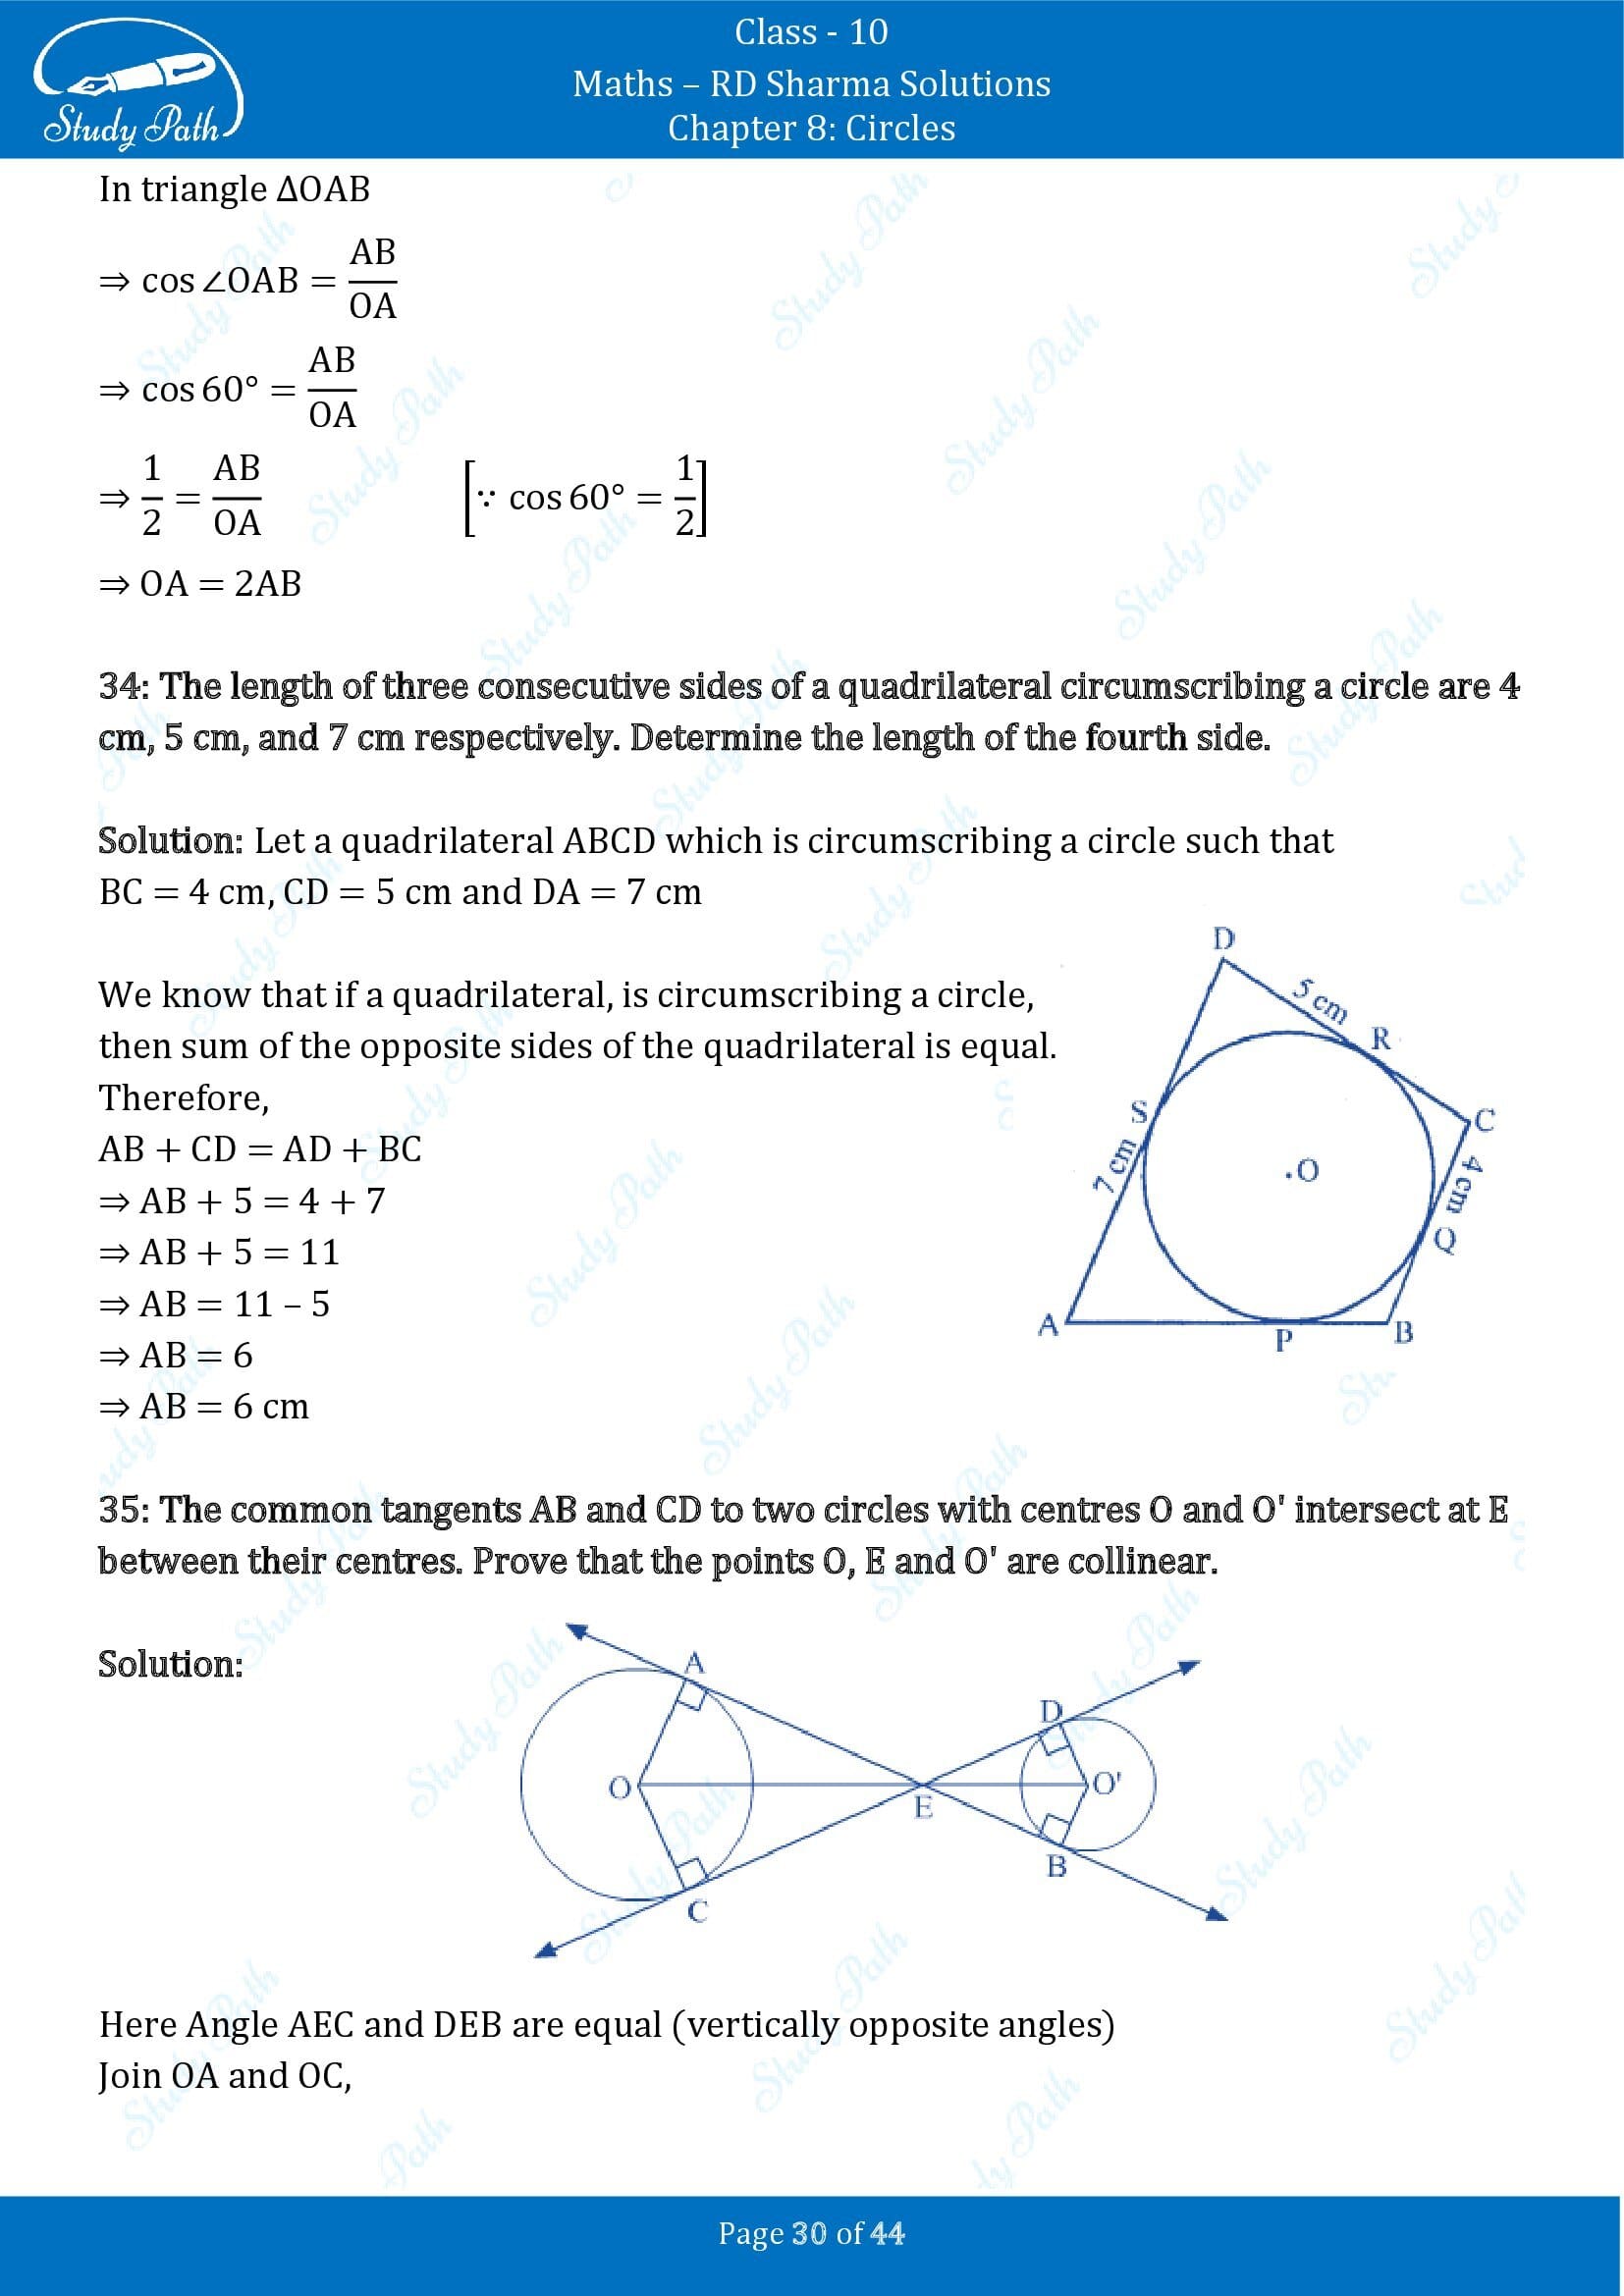 RD Sharma Solutions Class 10 Chapter 8 Circles Exercise 8.2 00030